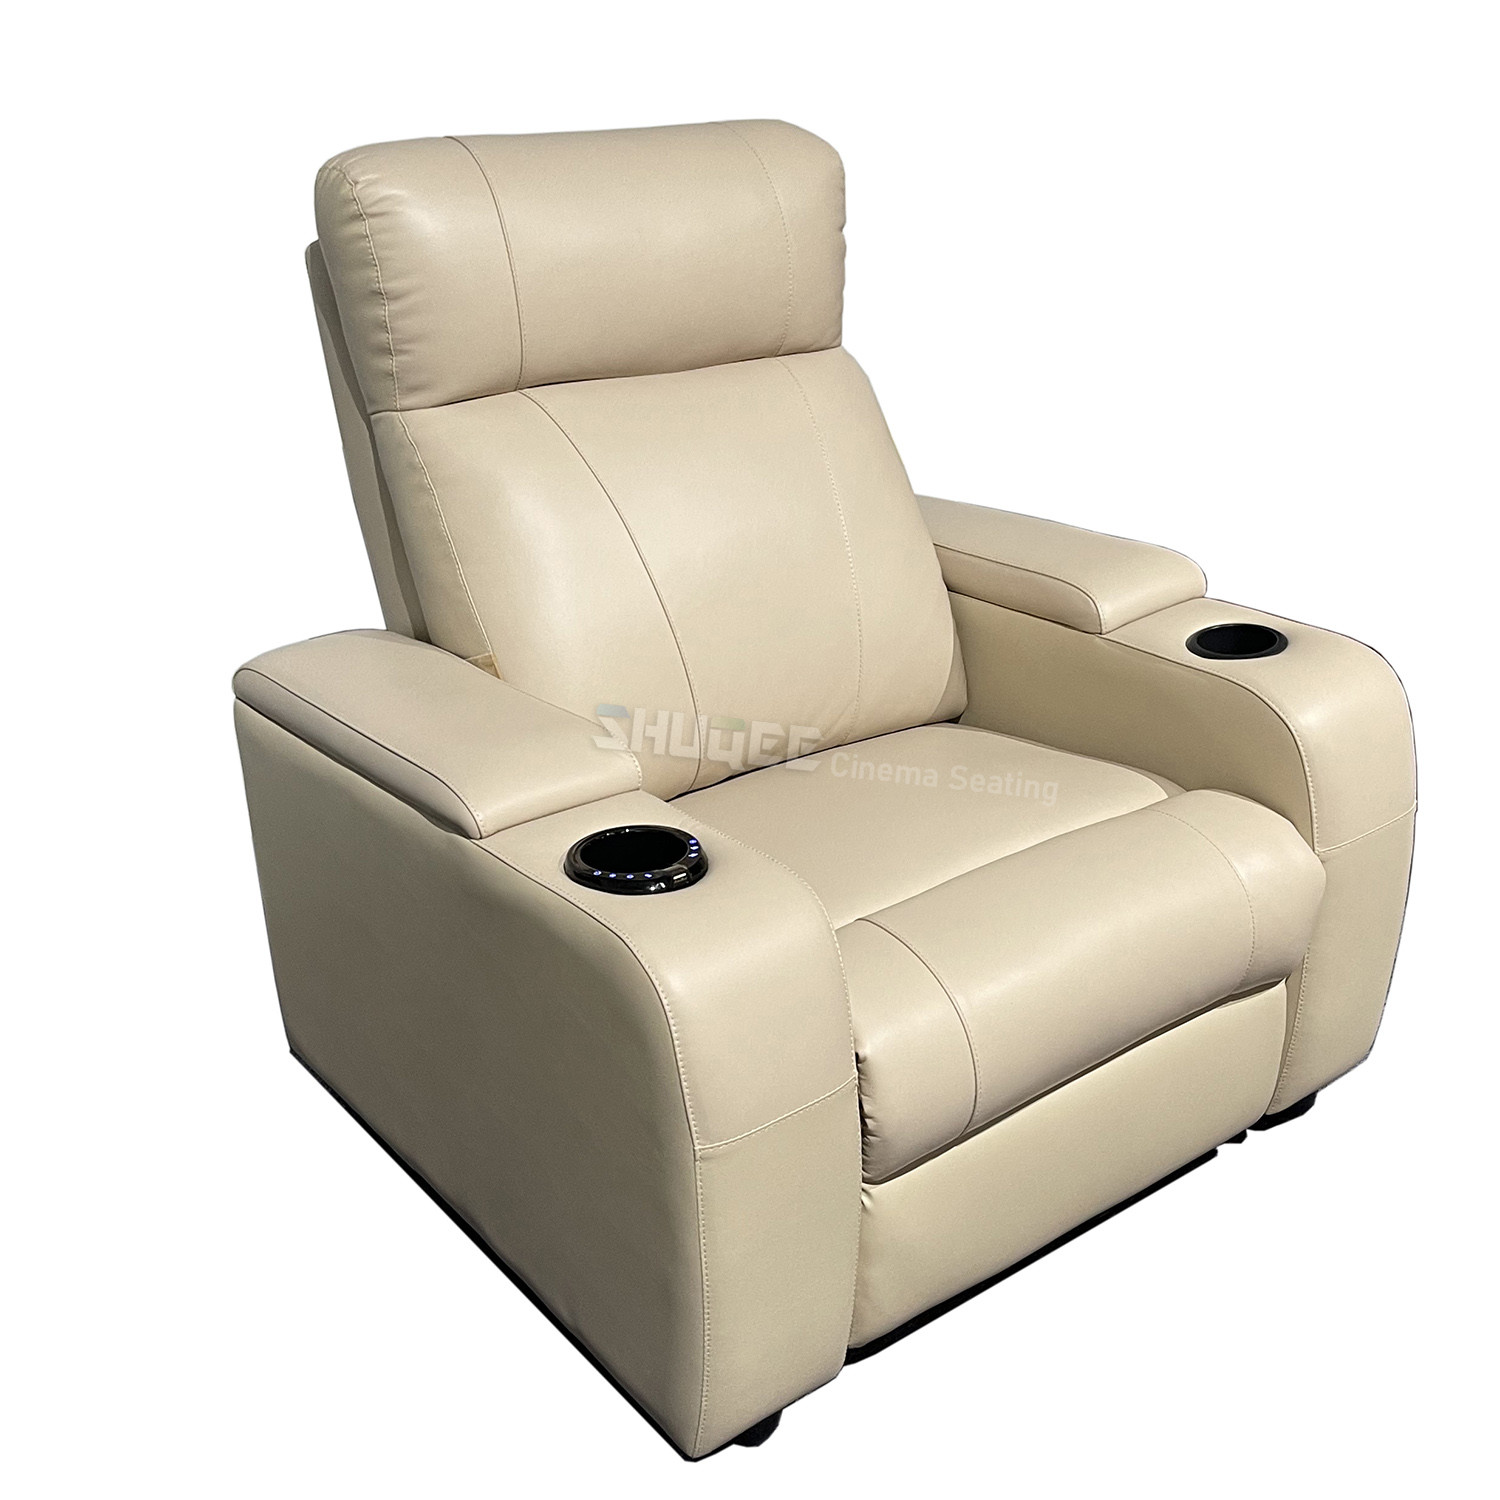 All Home Theater Equipment Supply VIP Leather Cinema Sofa With Cup Holder Available Colors